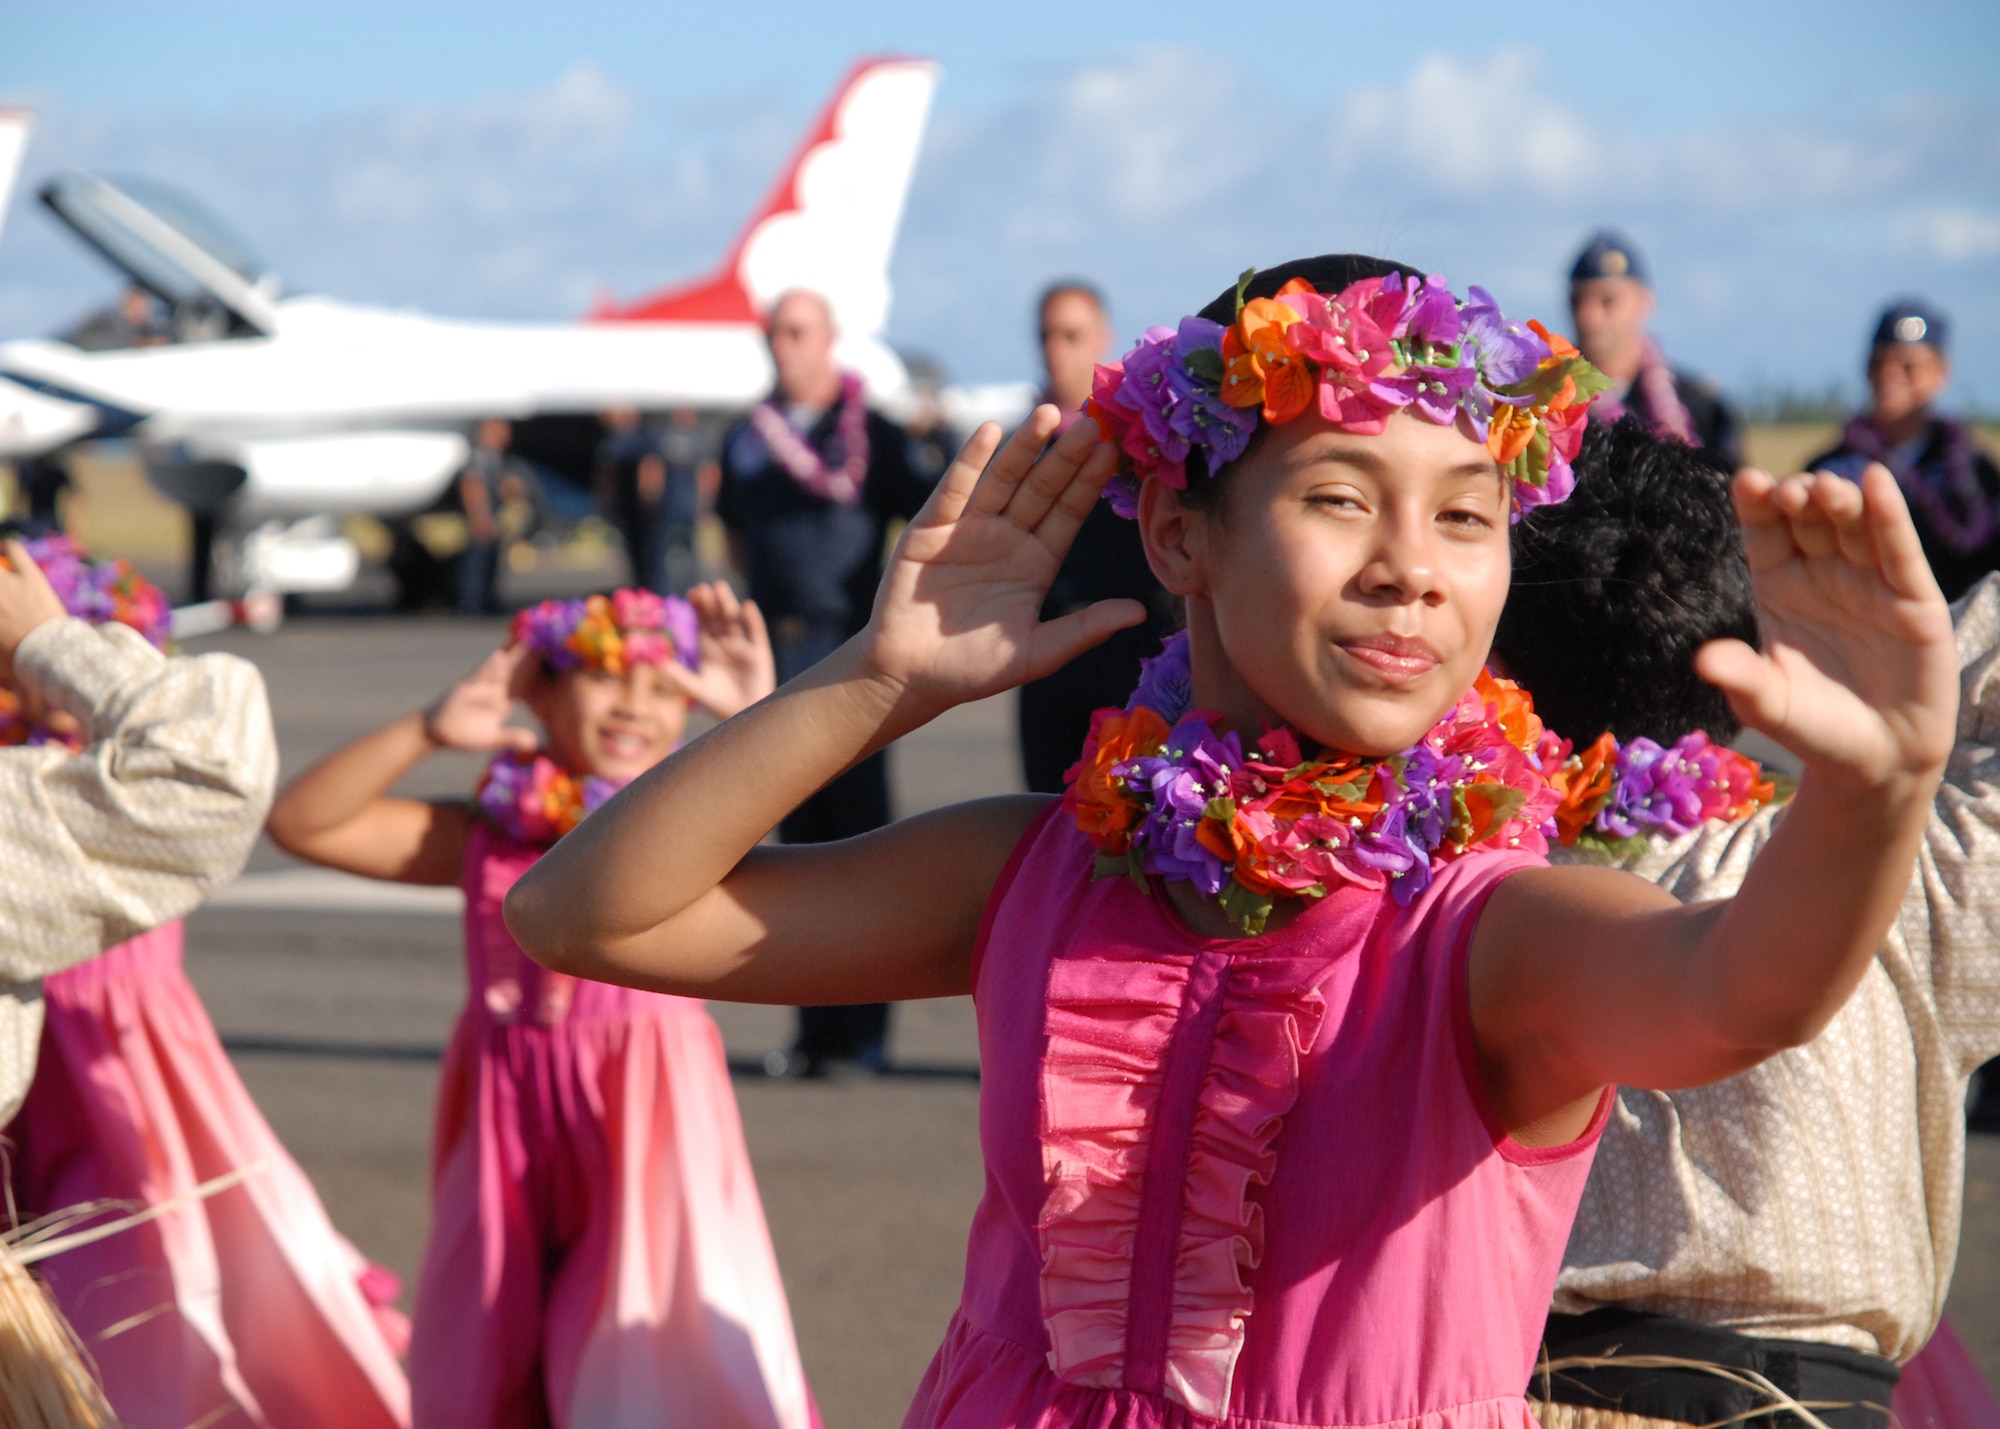 HICKAM AIR FORCE BASE, Hawaii - Children from the Halau Hula Olana under the direction of Kumu Hula Olana dance traditional hula dances for the U.S. Air Force Thunderbirds arrival Sept. 16 here. They met the pilots with leis to put around their necks to welcome them to Hawaii. The lei in the Hawaiian culture symbolizes many things, to include welcome and affection for the person receiving it. In 1975, Howard and Olana A`i established Halau Hula Olana, the School of Living Hula, where hundreds of children ages 6-13 have been instructed by Olana and her family. The halau frequently performs in Hawai`i, and has danced in Europe, Asia, the South Pacific, and across the United States. (U.S Air Force photo/Staff Sgt. Mike Meares)